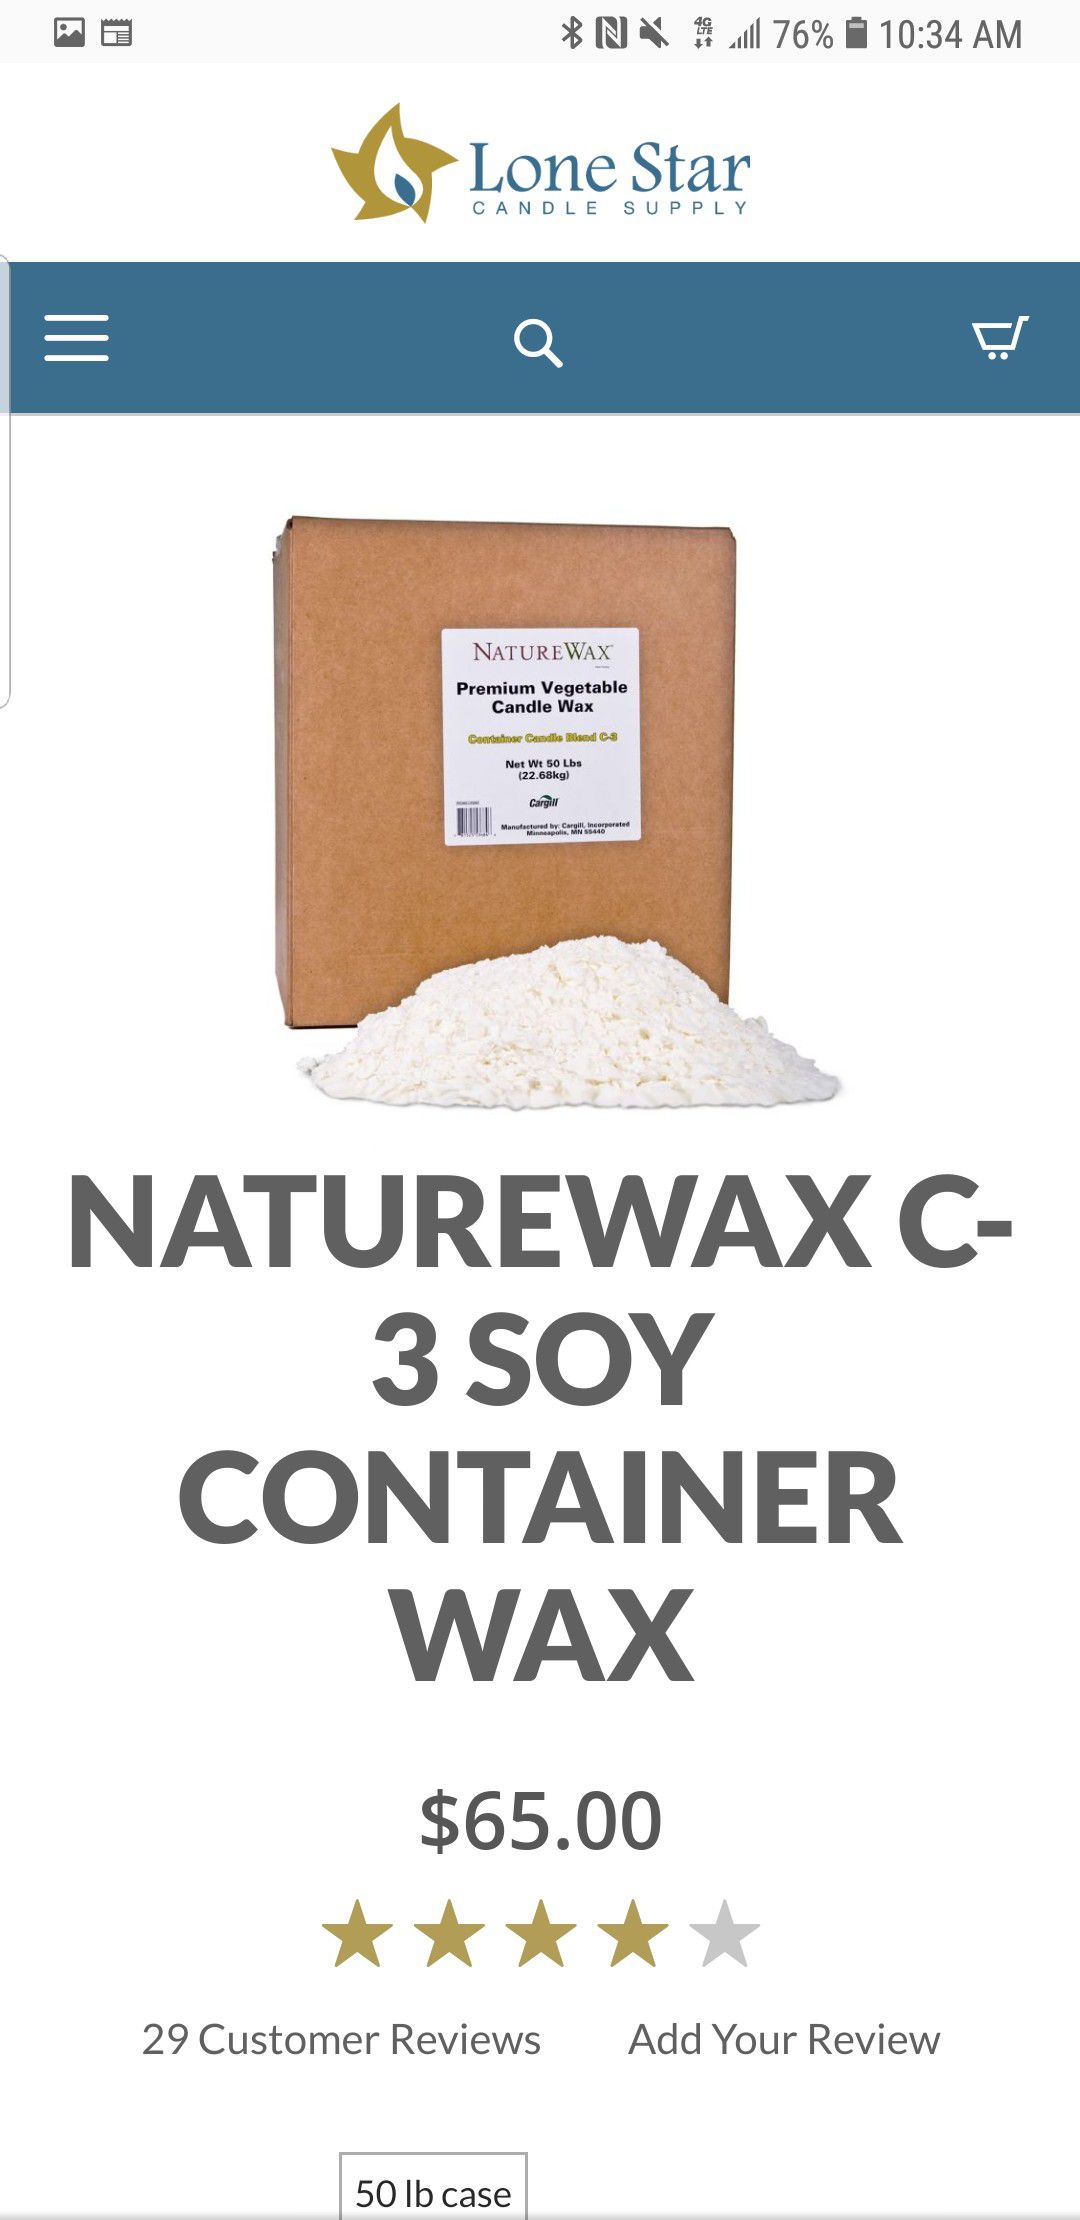 Naturewax C-3 Soy Container Wax - Lone Star Candle Supply